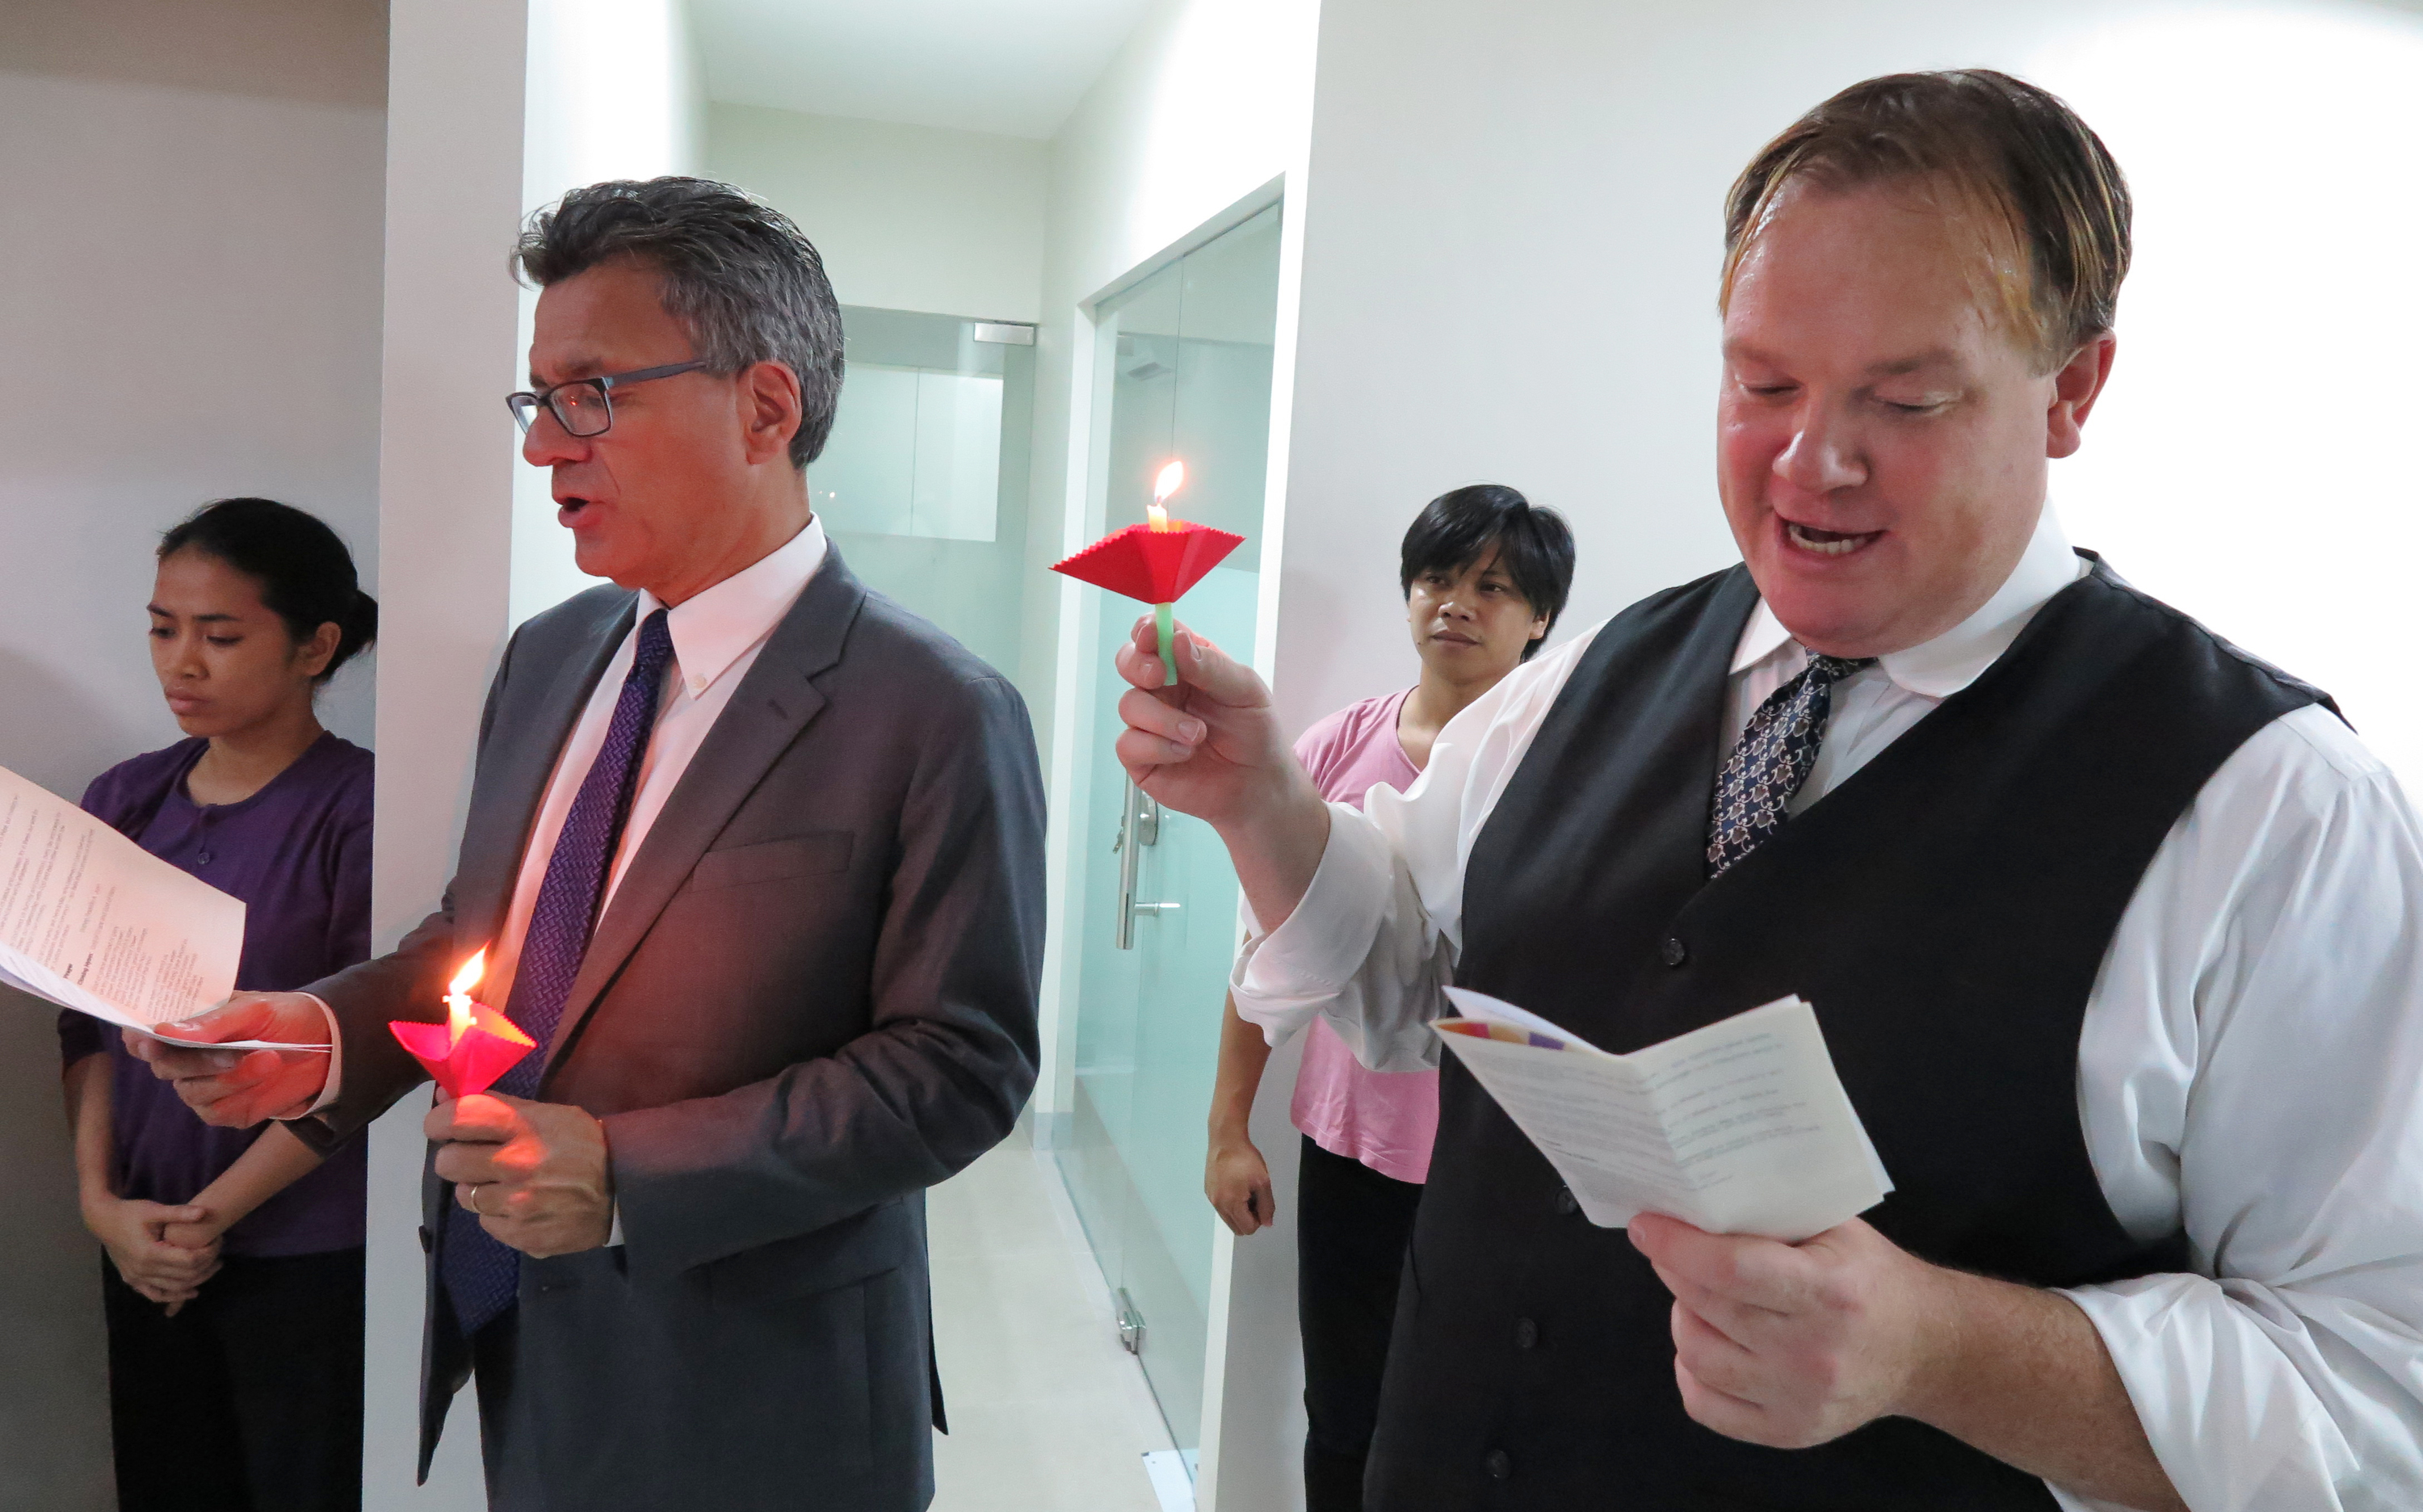 General secretaries Thomas Kemper from Global Ministries and Dan Krause from United Methodist Communications participate in a litany during the dedication ceremony of the new Manila Agency Center. Photo by Tim Tanton, UMNS.